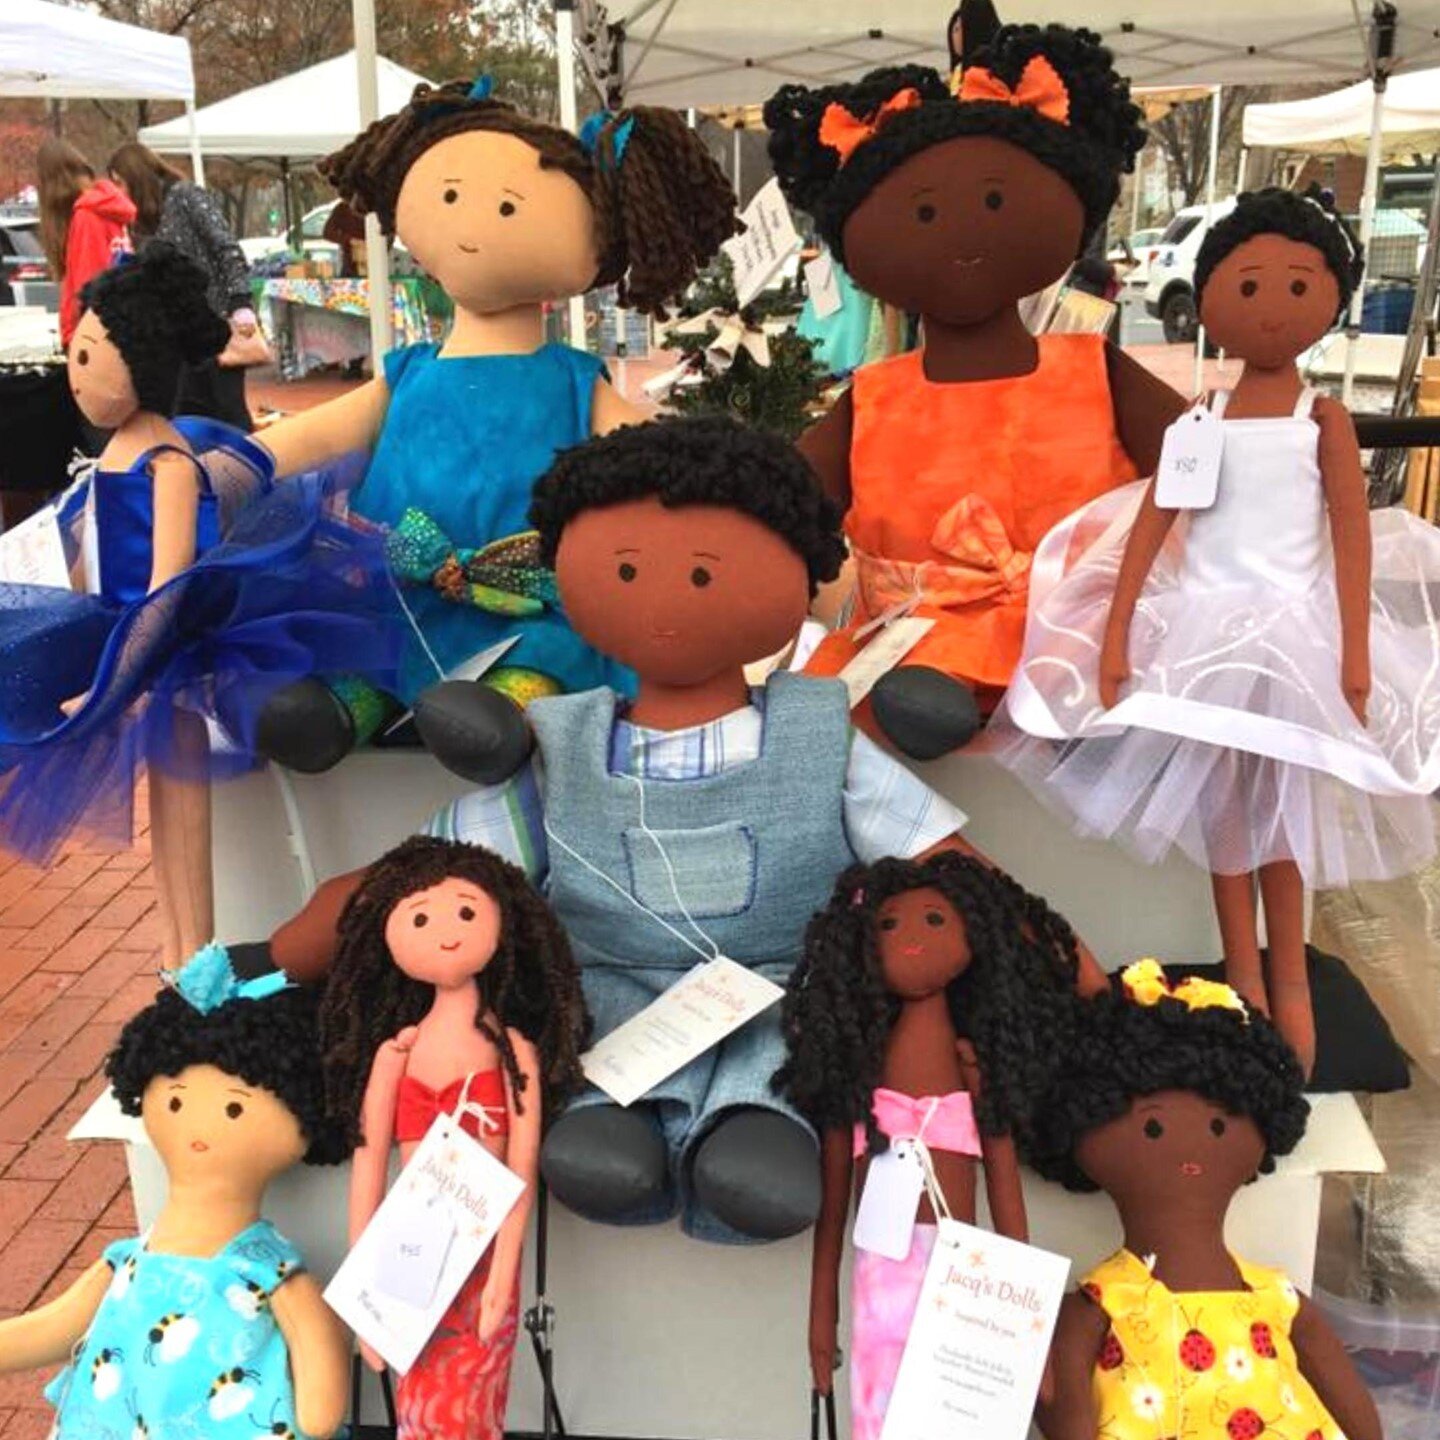 𝕍𝕖𝕟𝕕𝕠𝕣 𝕊𝕡𝕠𝕥𝕝𝕚𝕘𝕙𝕥✨

Jacq's Dolls creates lovingly handmade dolls in a wide range of skintones, perfect for any little one who wants their own mini-me. She will also be selling original quilted artwork and prints of her work at the festi